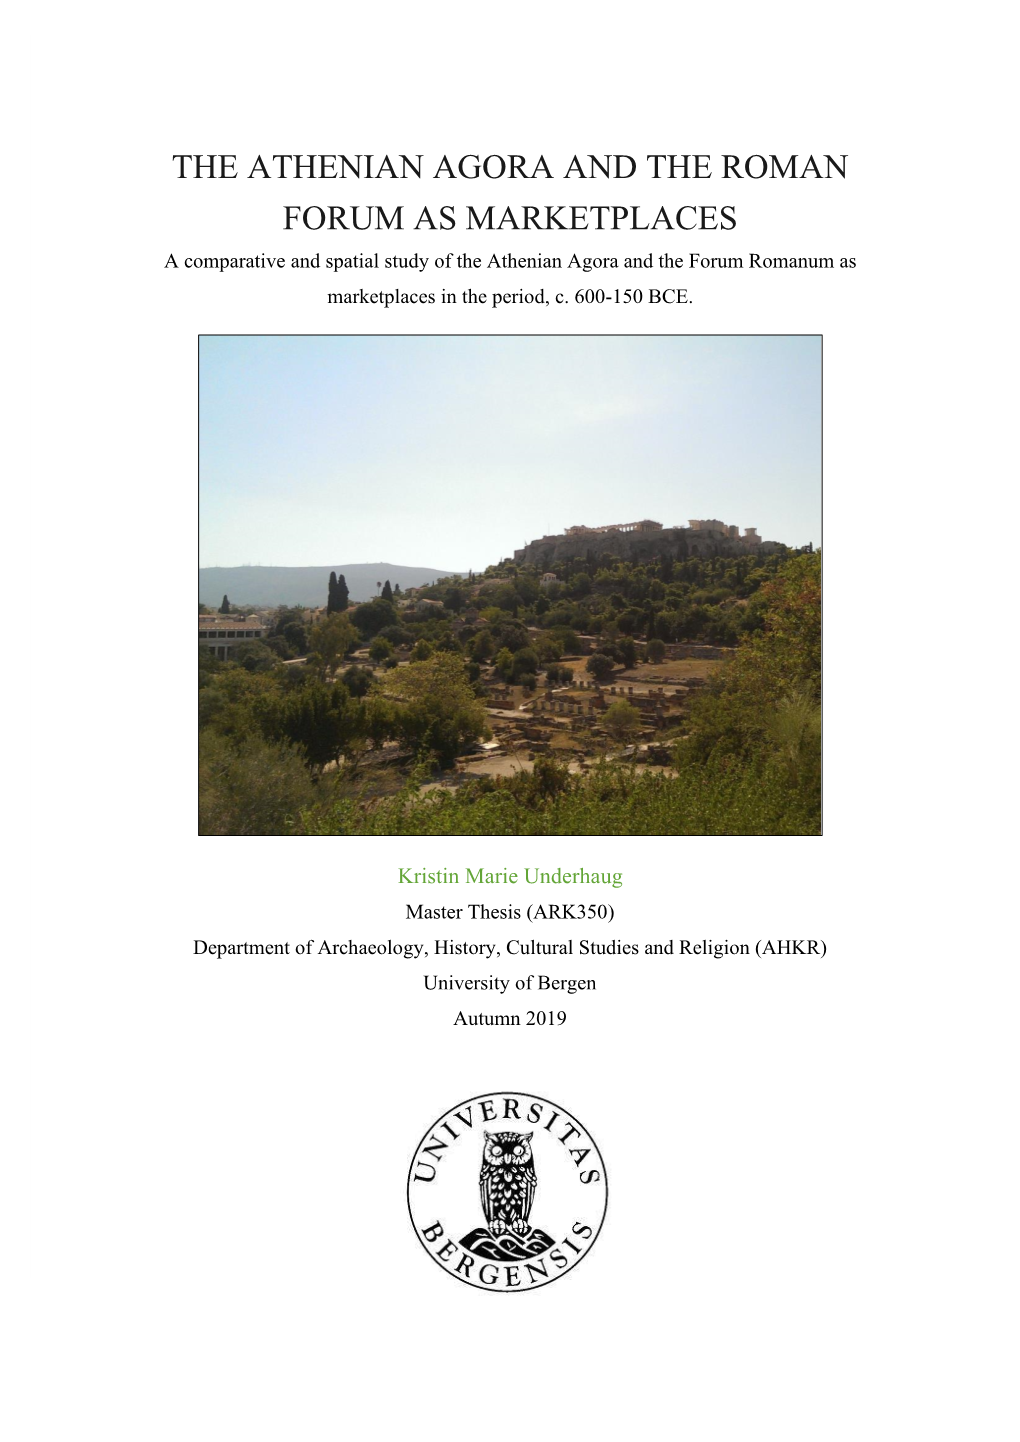 THE ATHENIAN AGORA and the ROMAN FORUM AS MARKETPLACES a Comparative and Spatial Study of the Athenian Agora and the Forum Romanum As Marketplaces in the Period, C